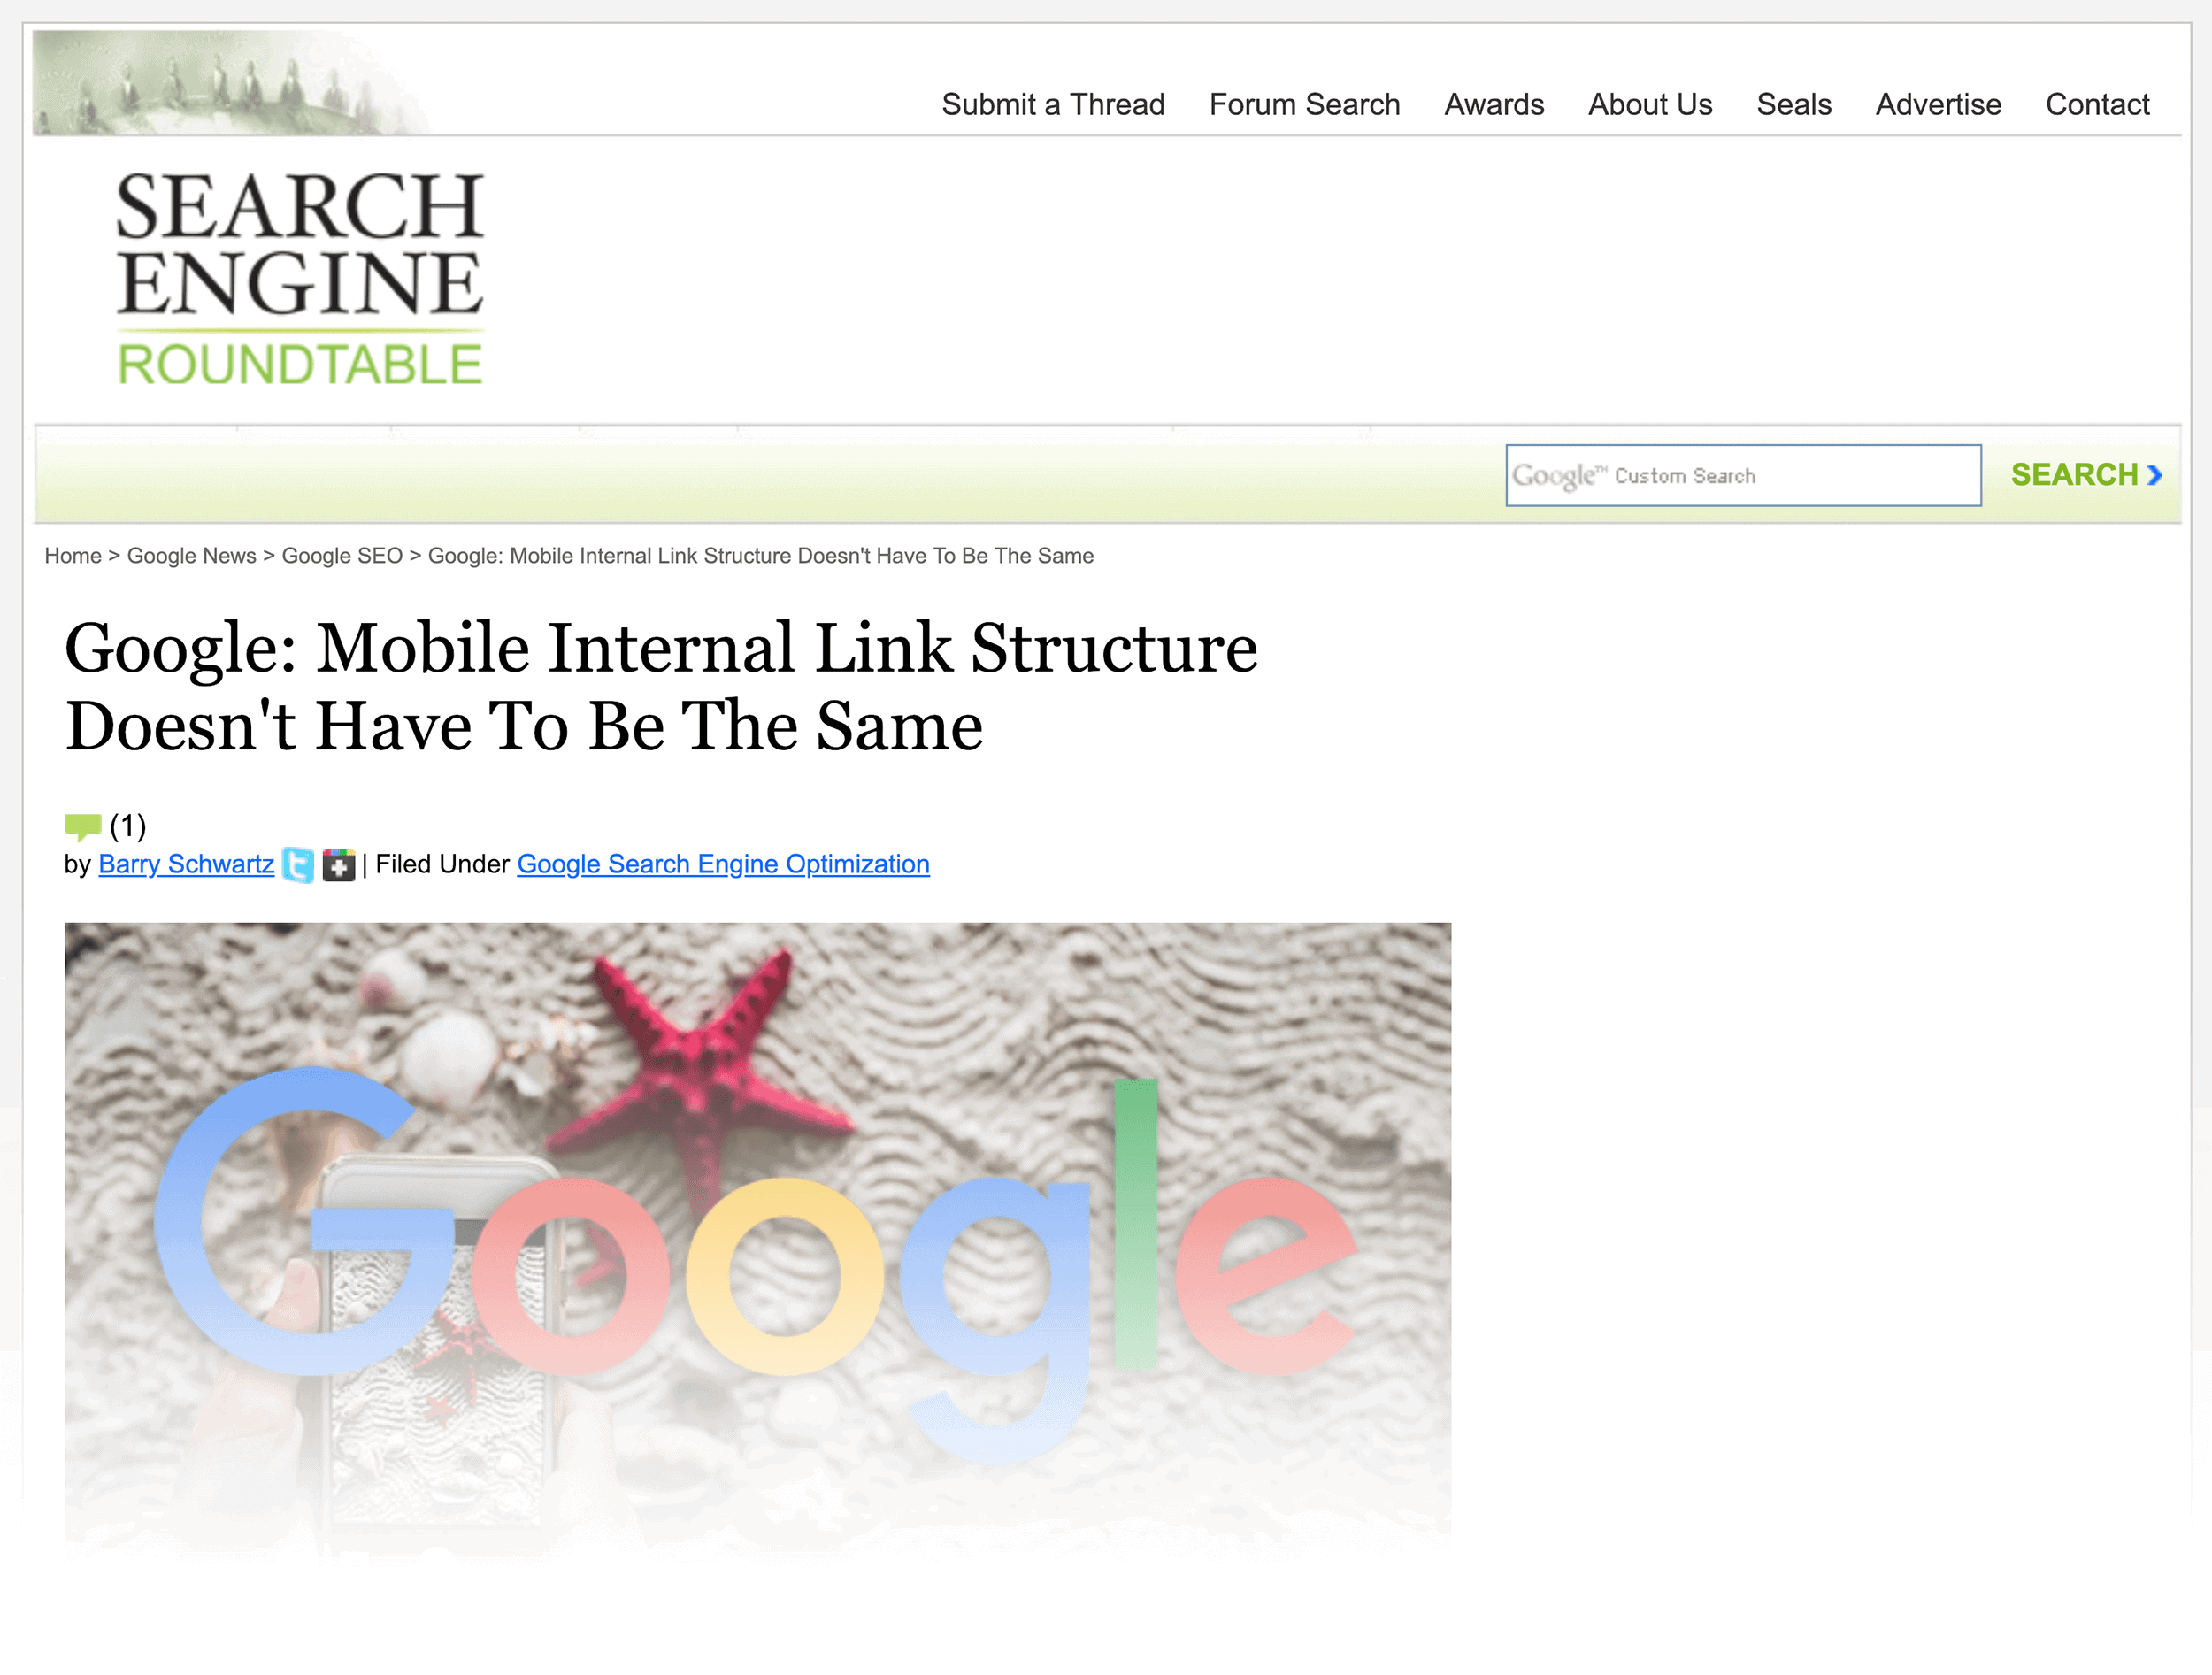 Google has said it's okay to have different link structures for desktop and mobile versions of your site